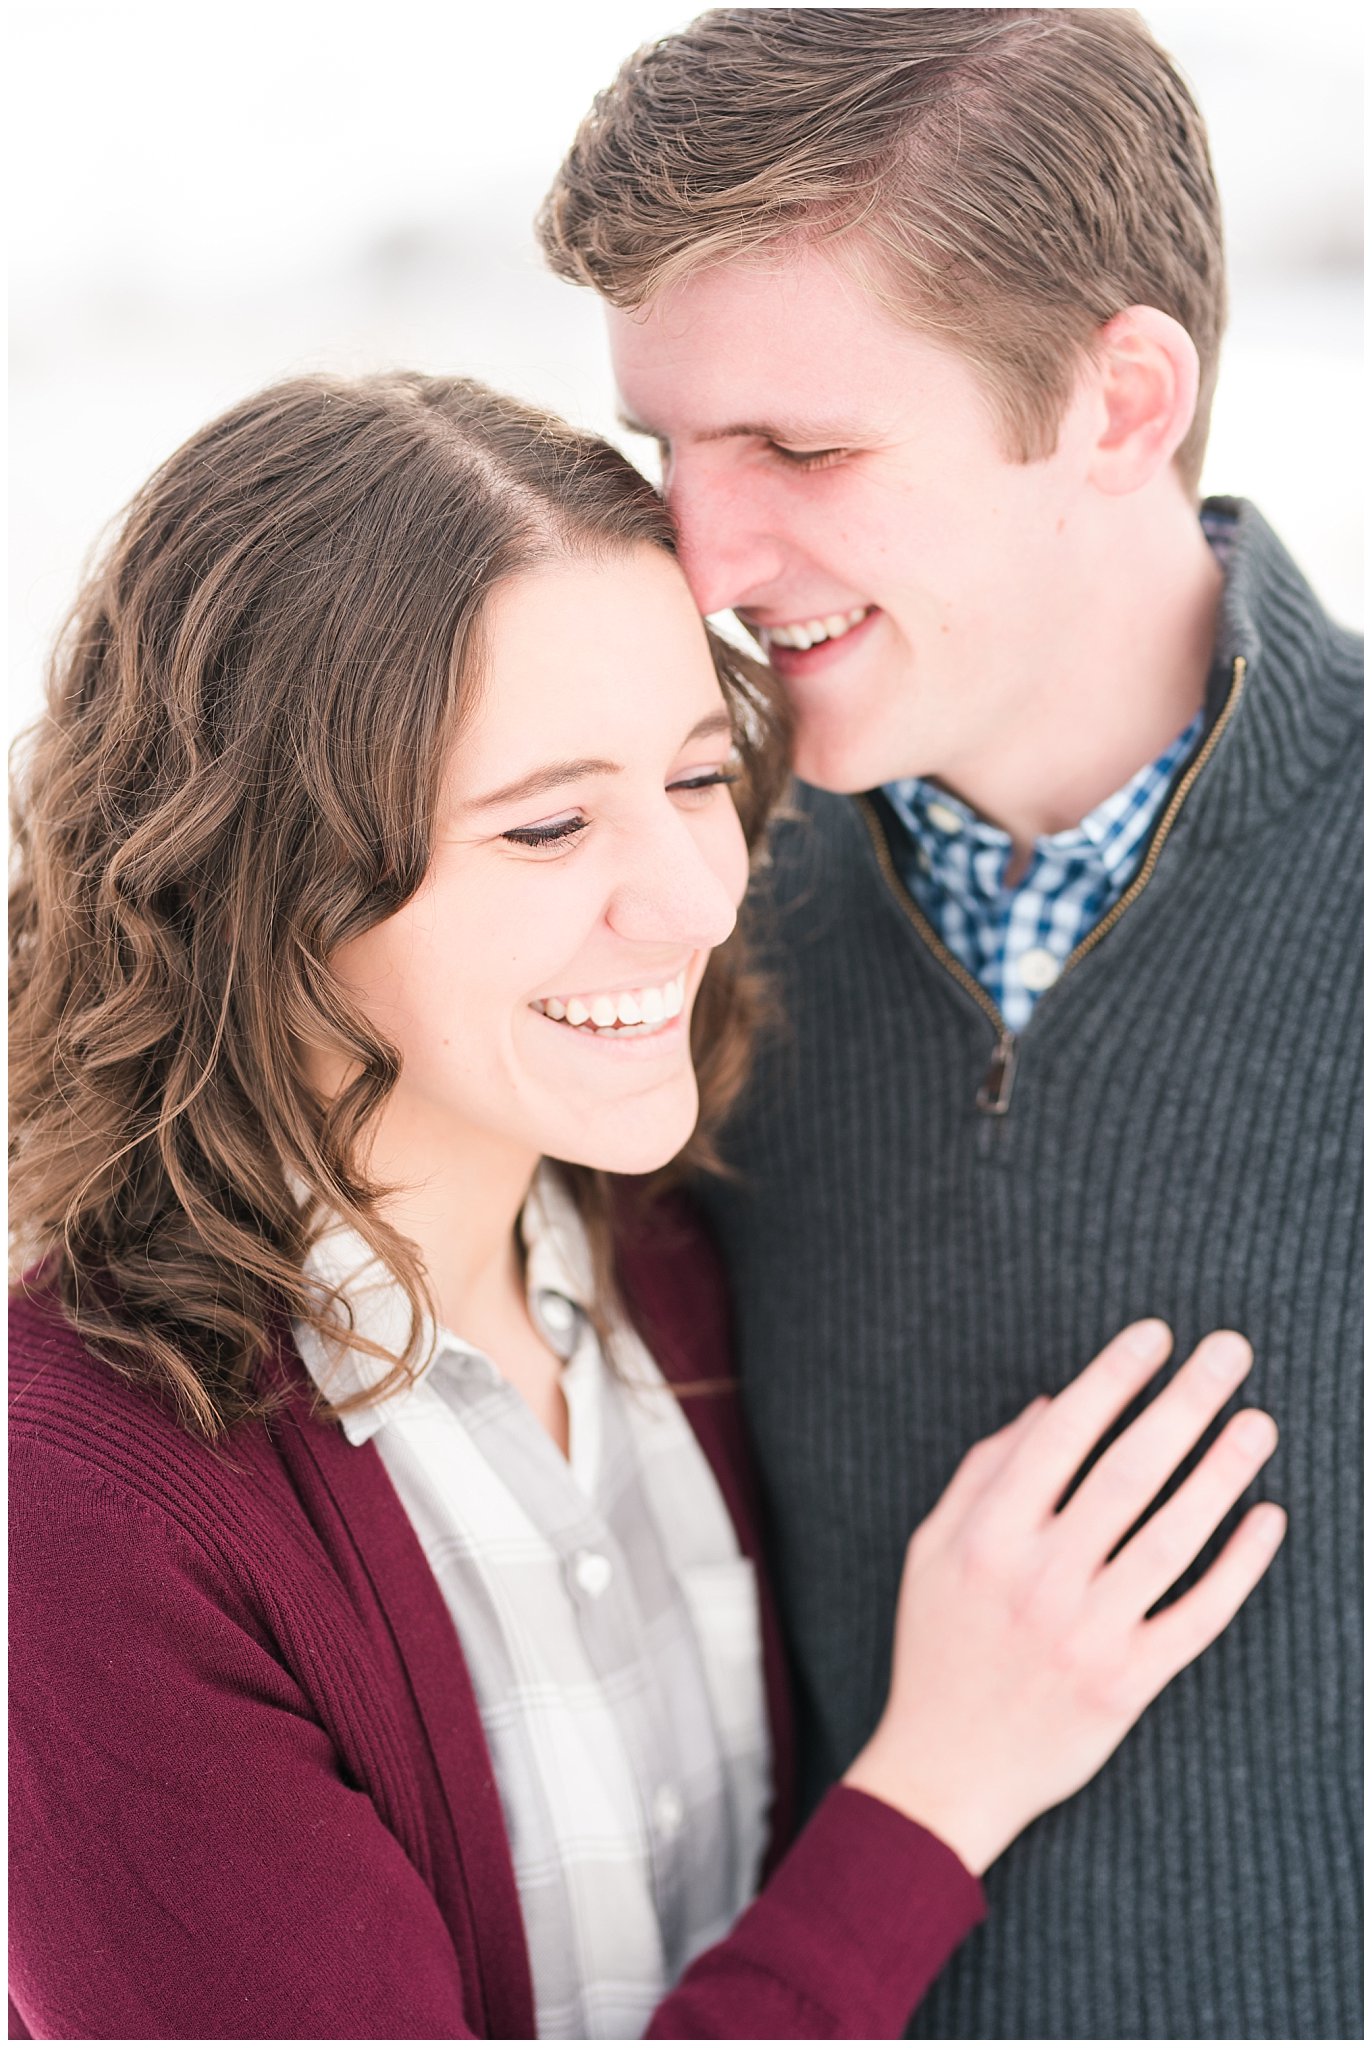 Snowy engagement session with couple in sweaters and boots in the mountains | Snowbasin Winter Engagement Session